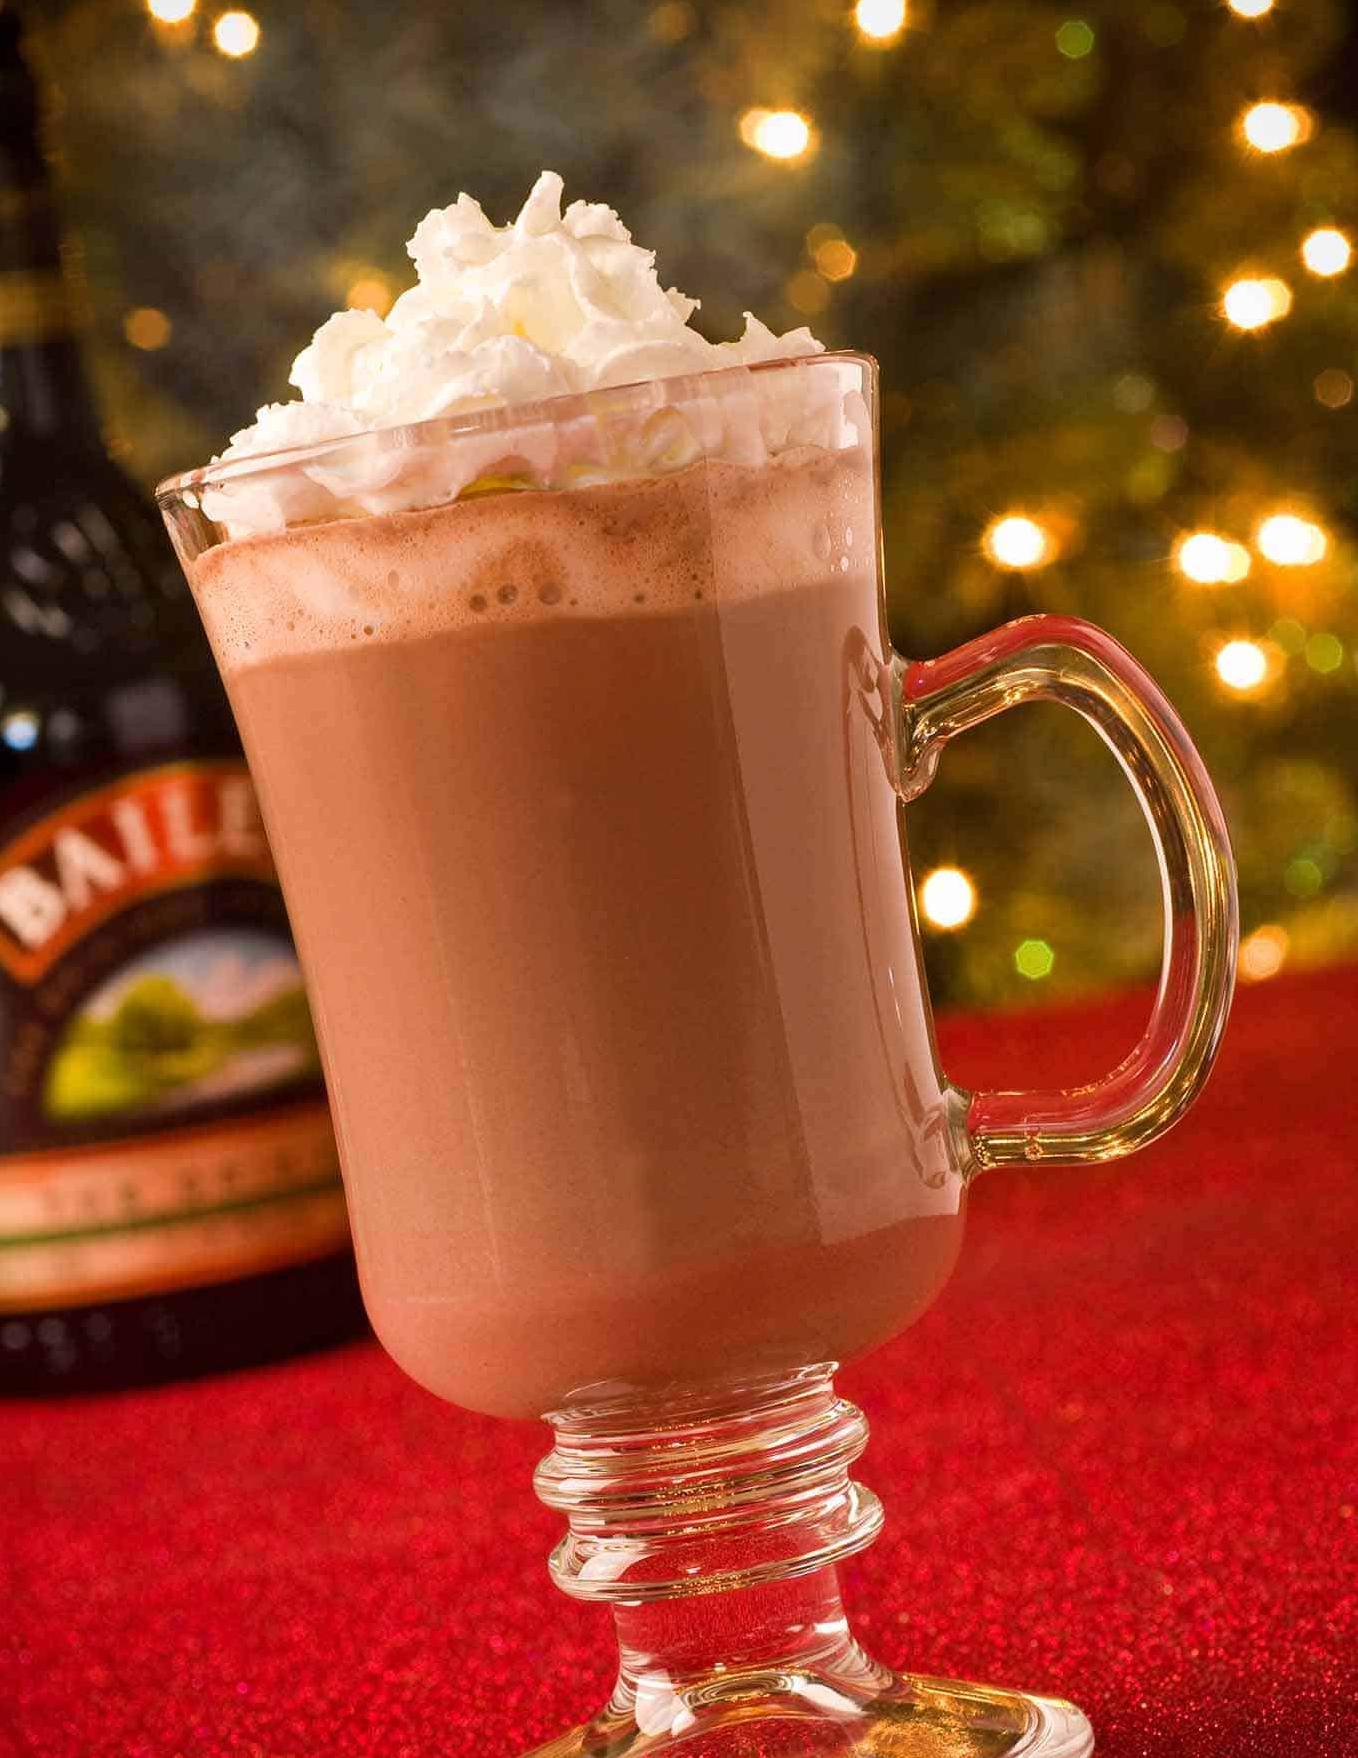 Warm up your soul with this Irish Hot Chocolate recipe